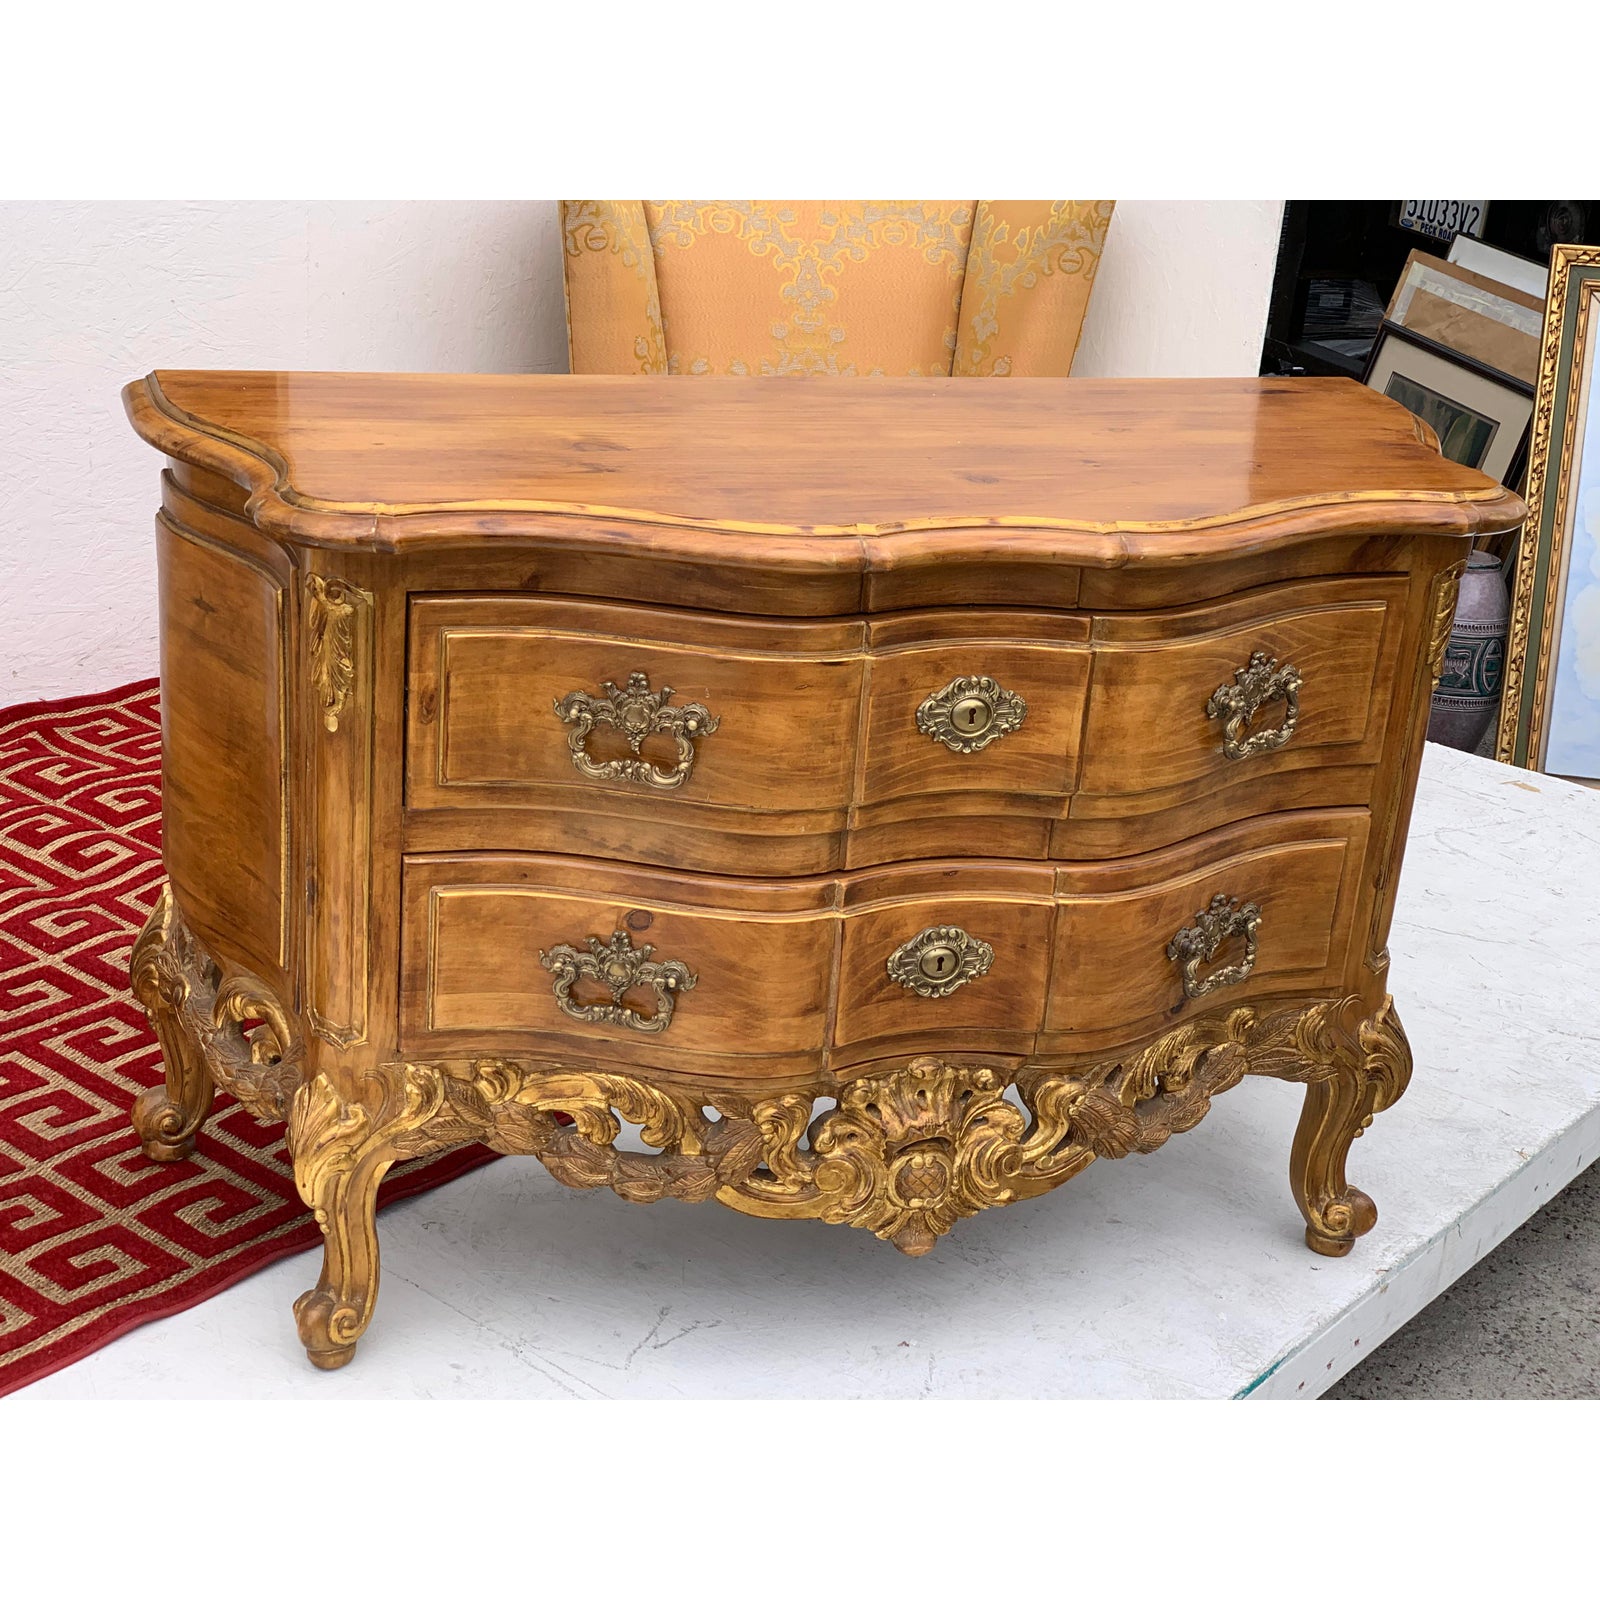 baltic-style-louis-xv-style-chest-of-drawers-9568